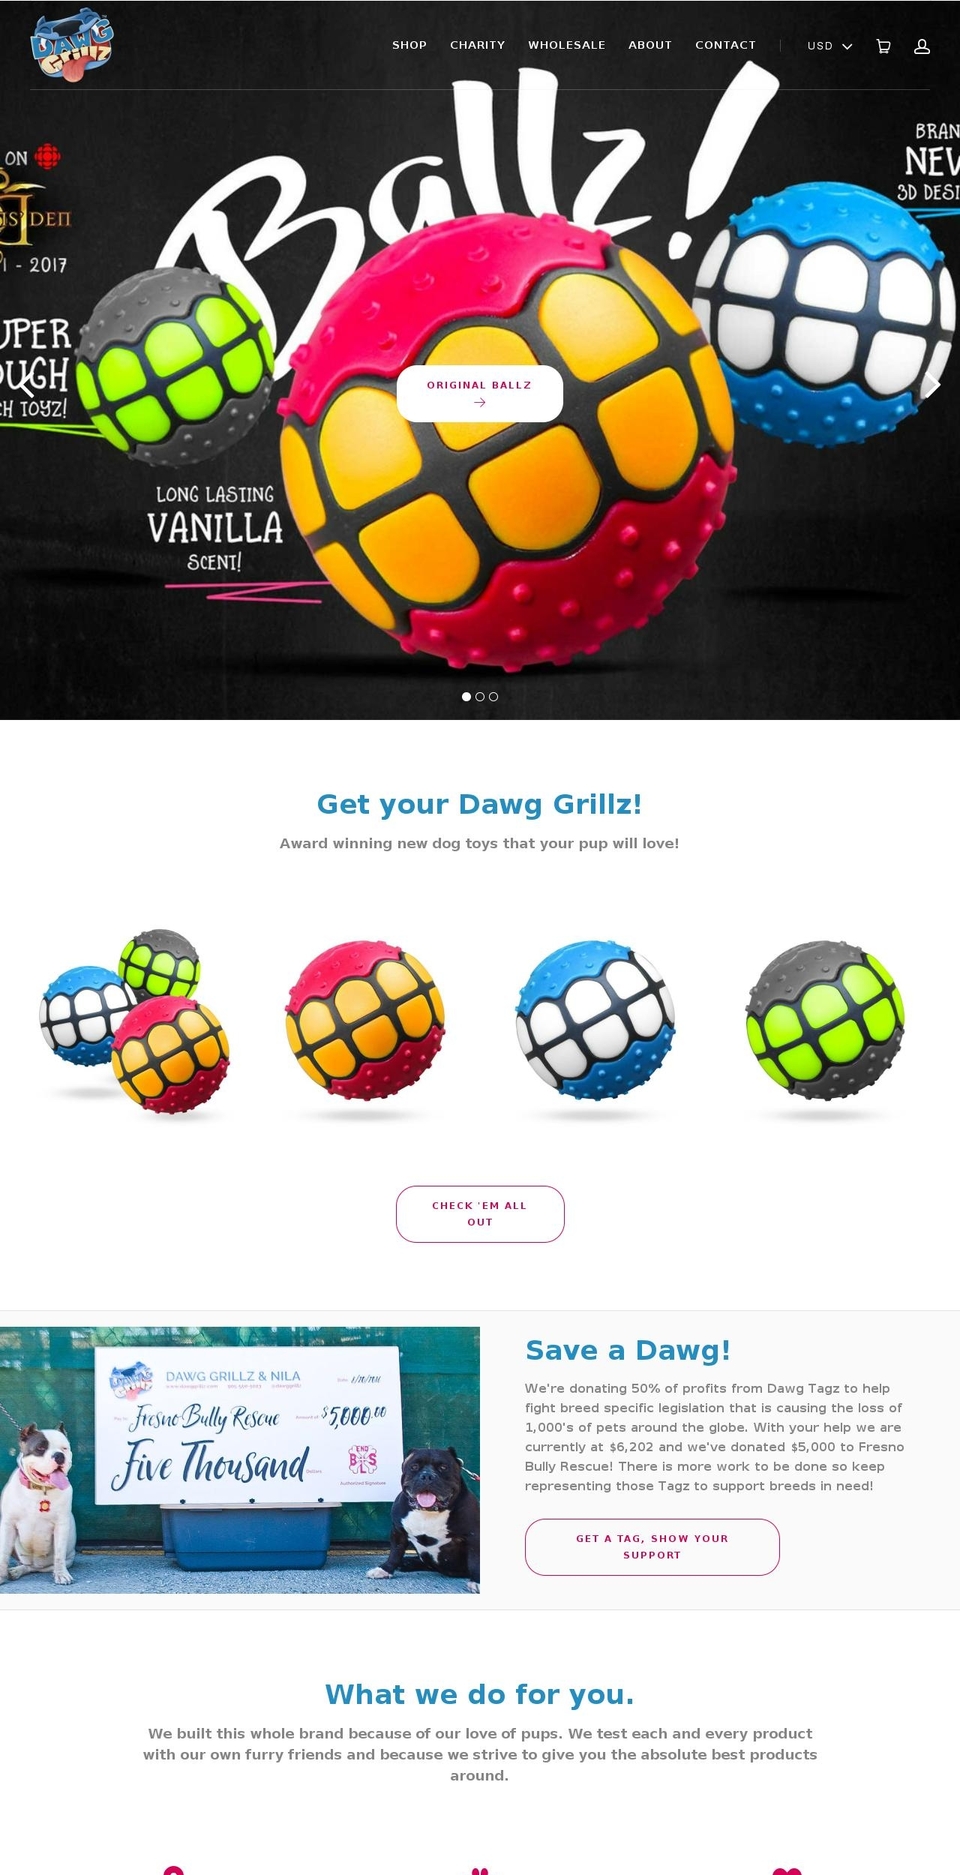 Launch Shopify theme site example dawggrillz.com